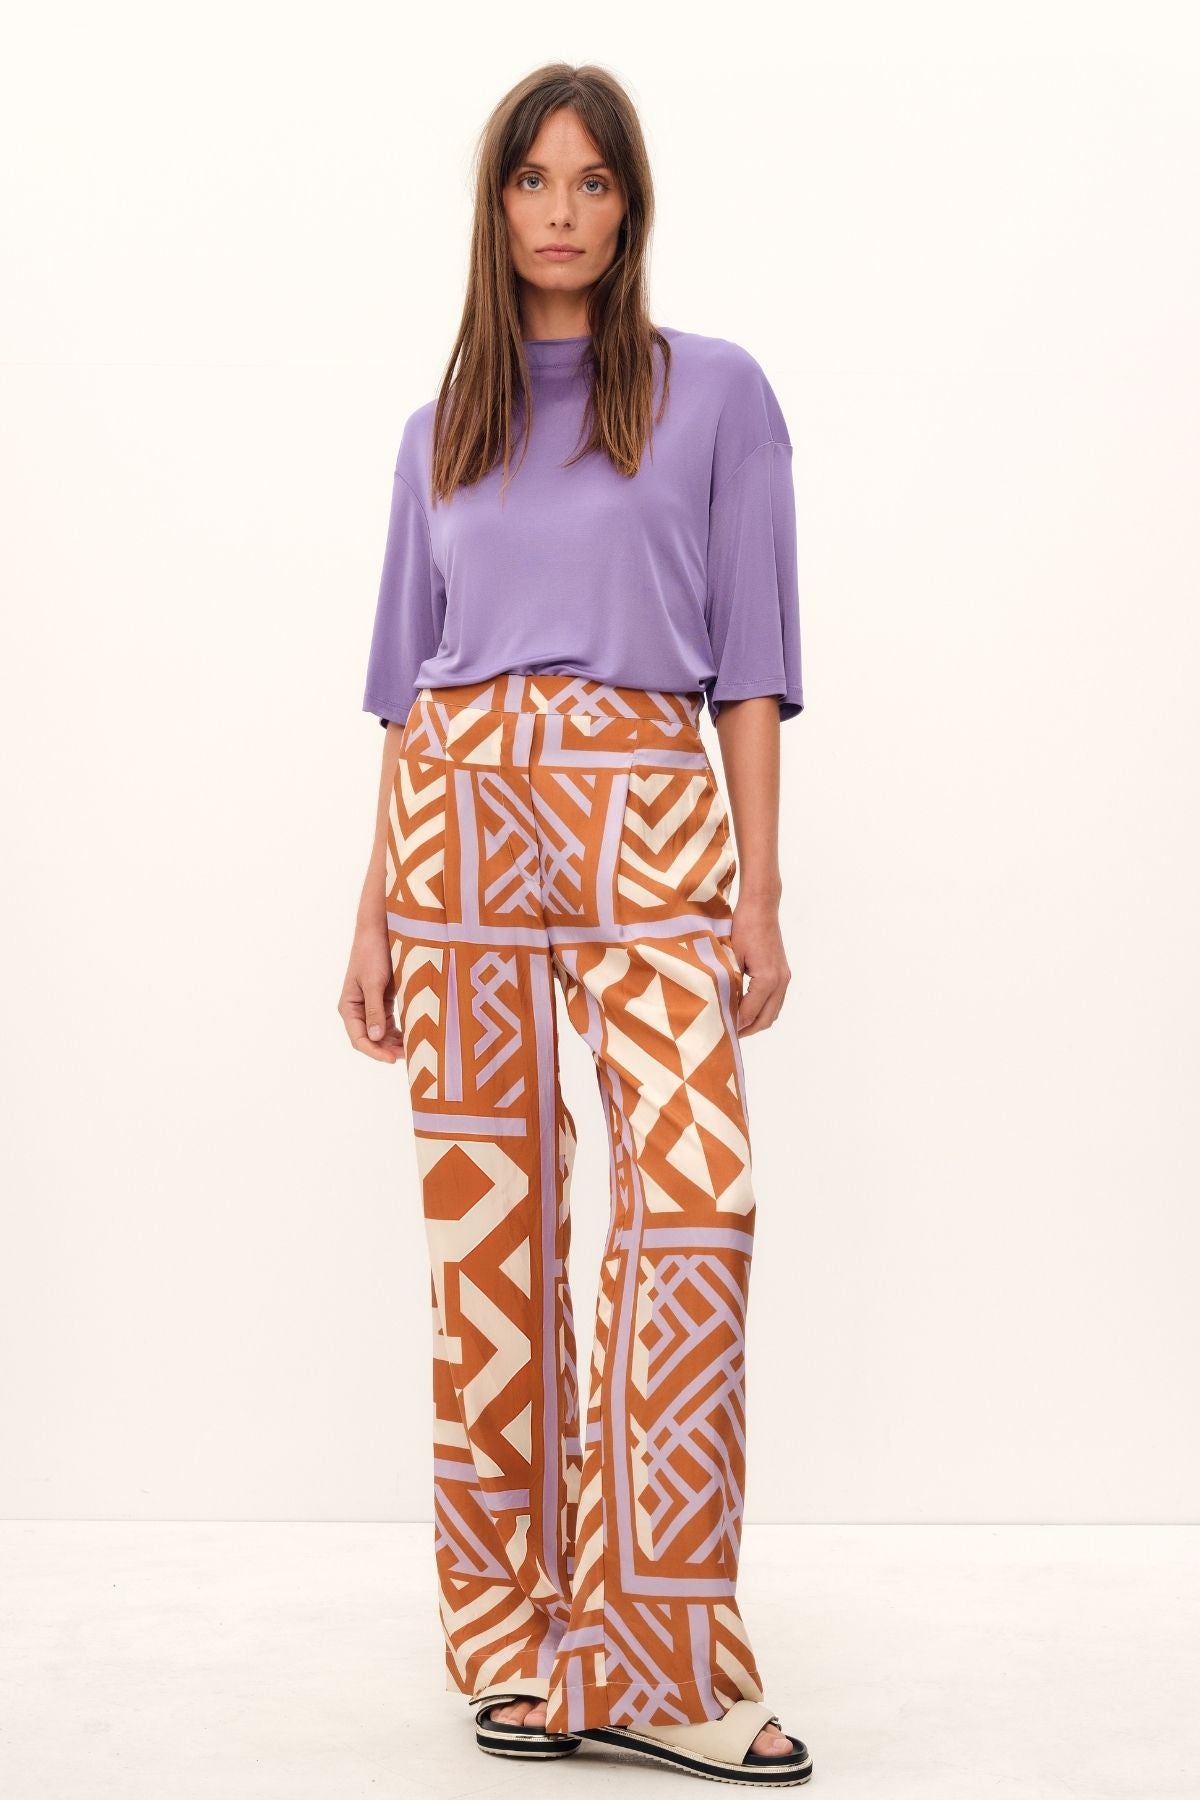 Bold floral print of the House of Mirrors Pant in fresh shades of cream, lilac, and tan. These pants by GINGER & SMART offer a flattering fit with a straight leg, fitted front waistband, and tucks. Made from luxurious silk twill.